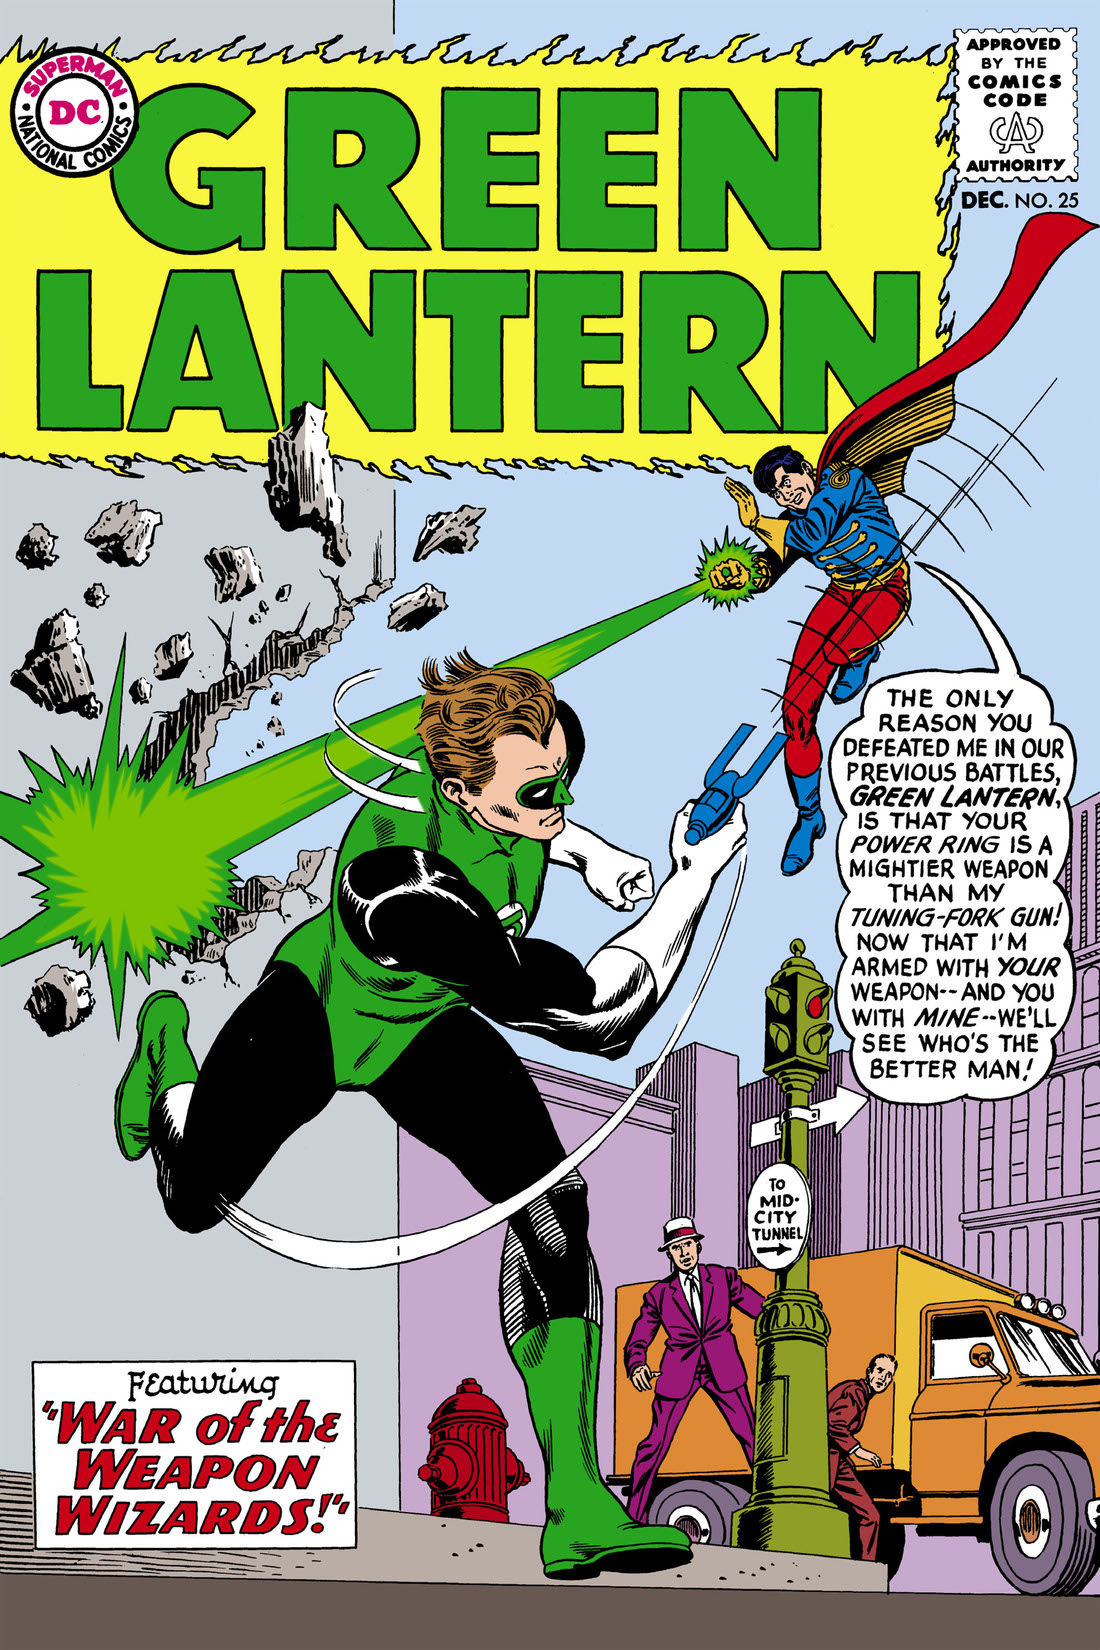 Green Lantern (1960-) #25 preview images